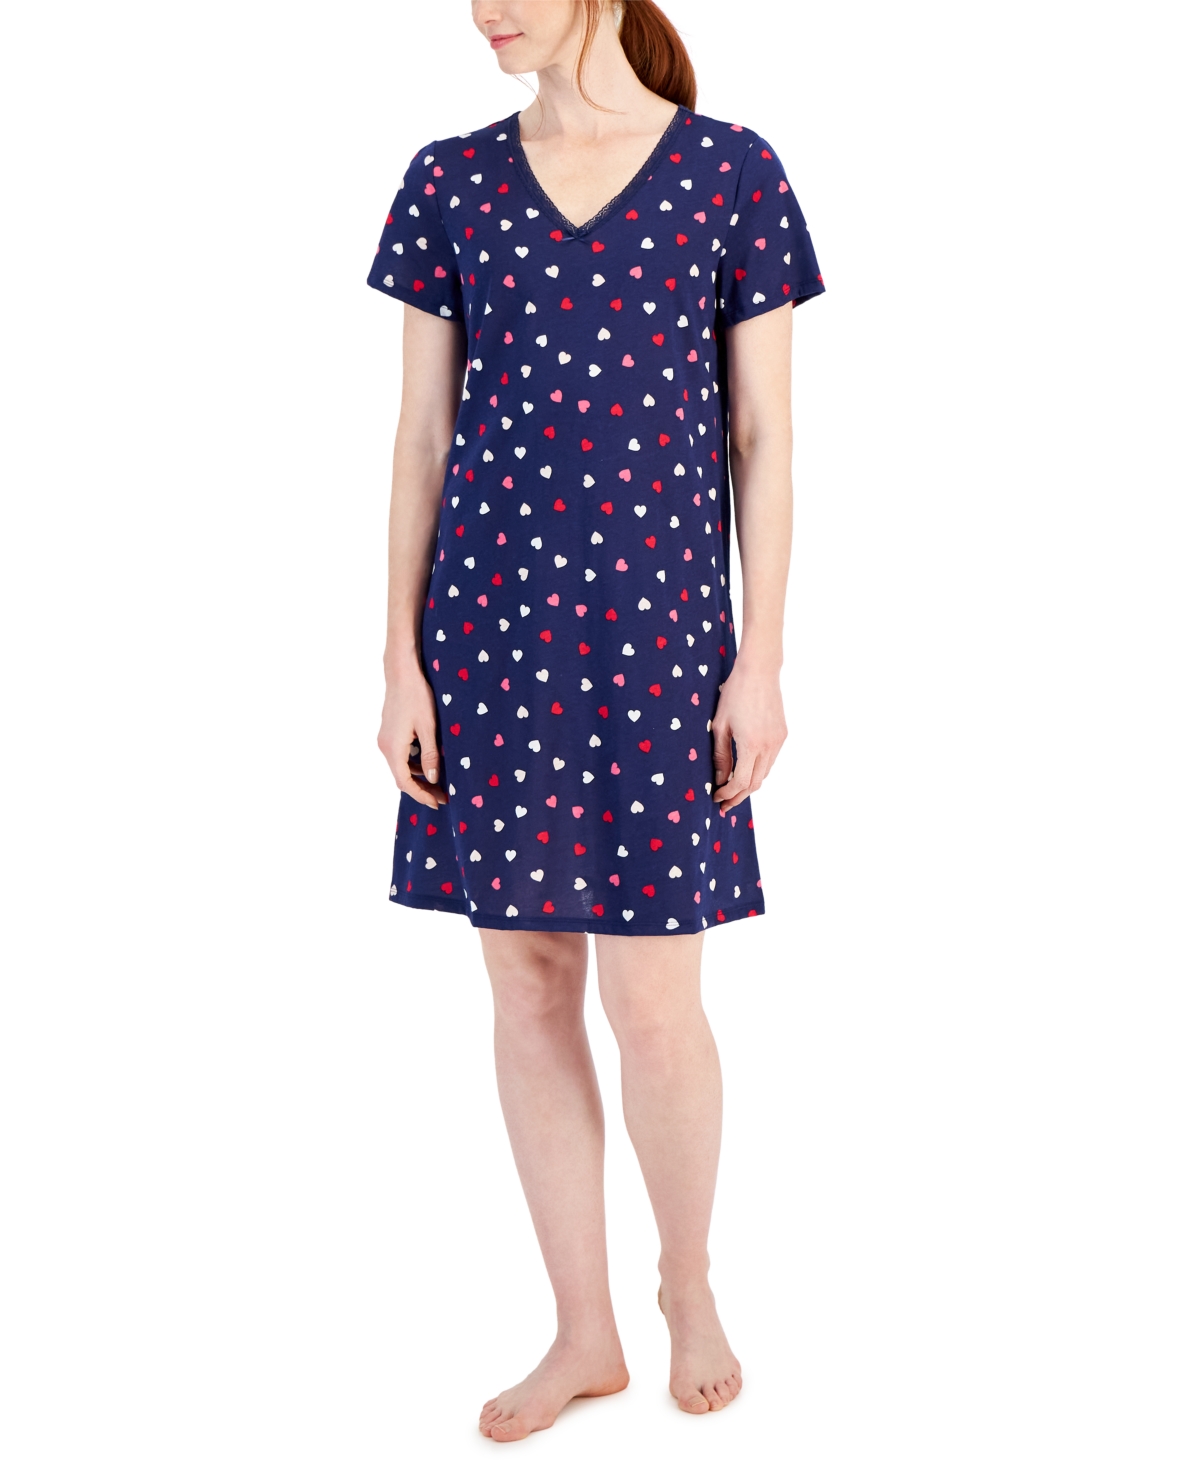 Women's Cotton Printed Lace-Trim Nightgown, Created for Macy's - Multi Hearts